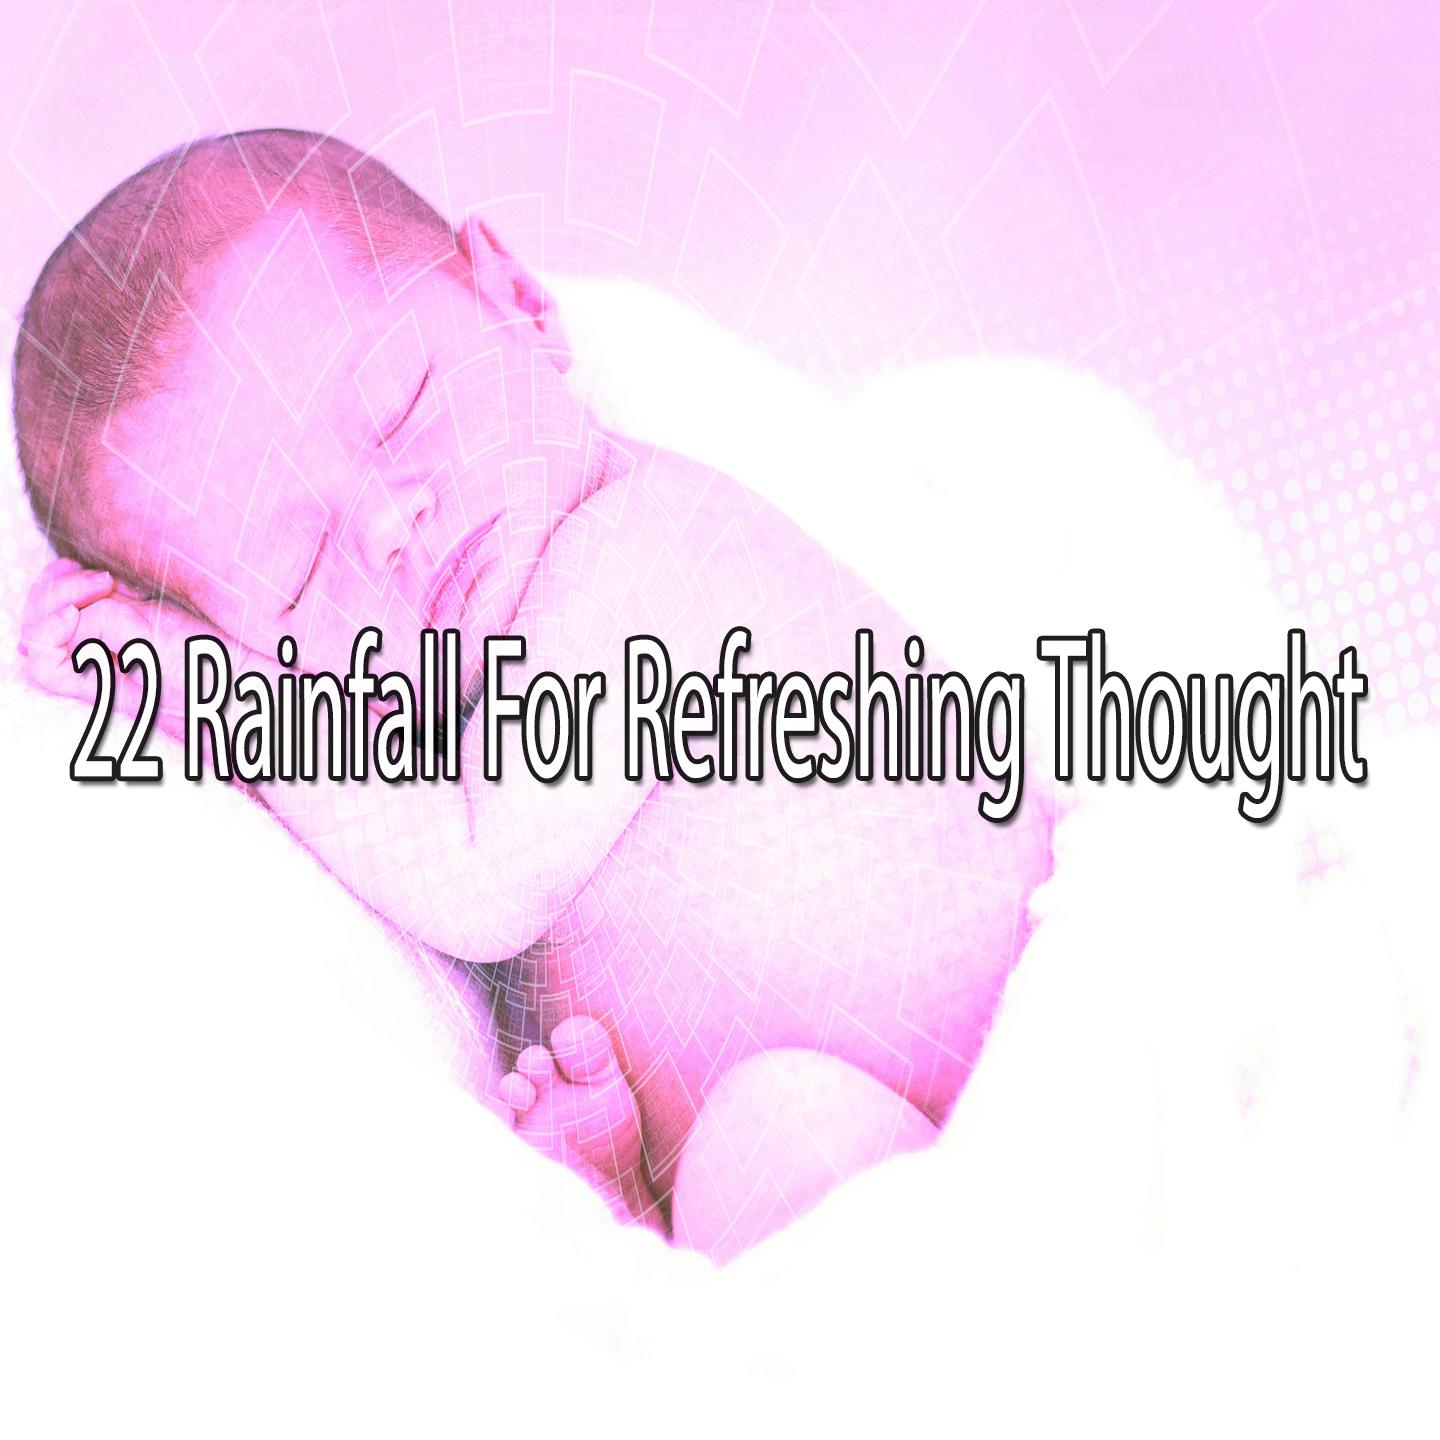 22 Rainfall for Refreshing Thought